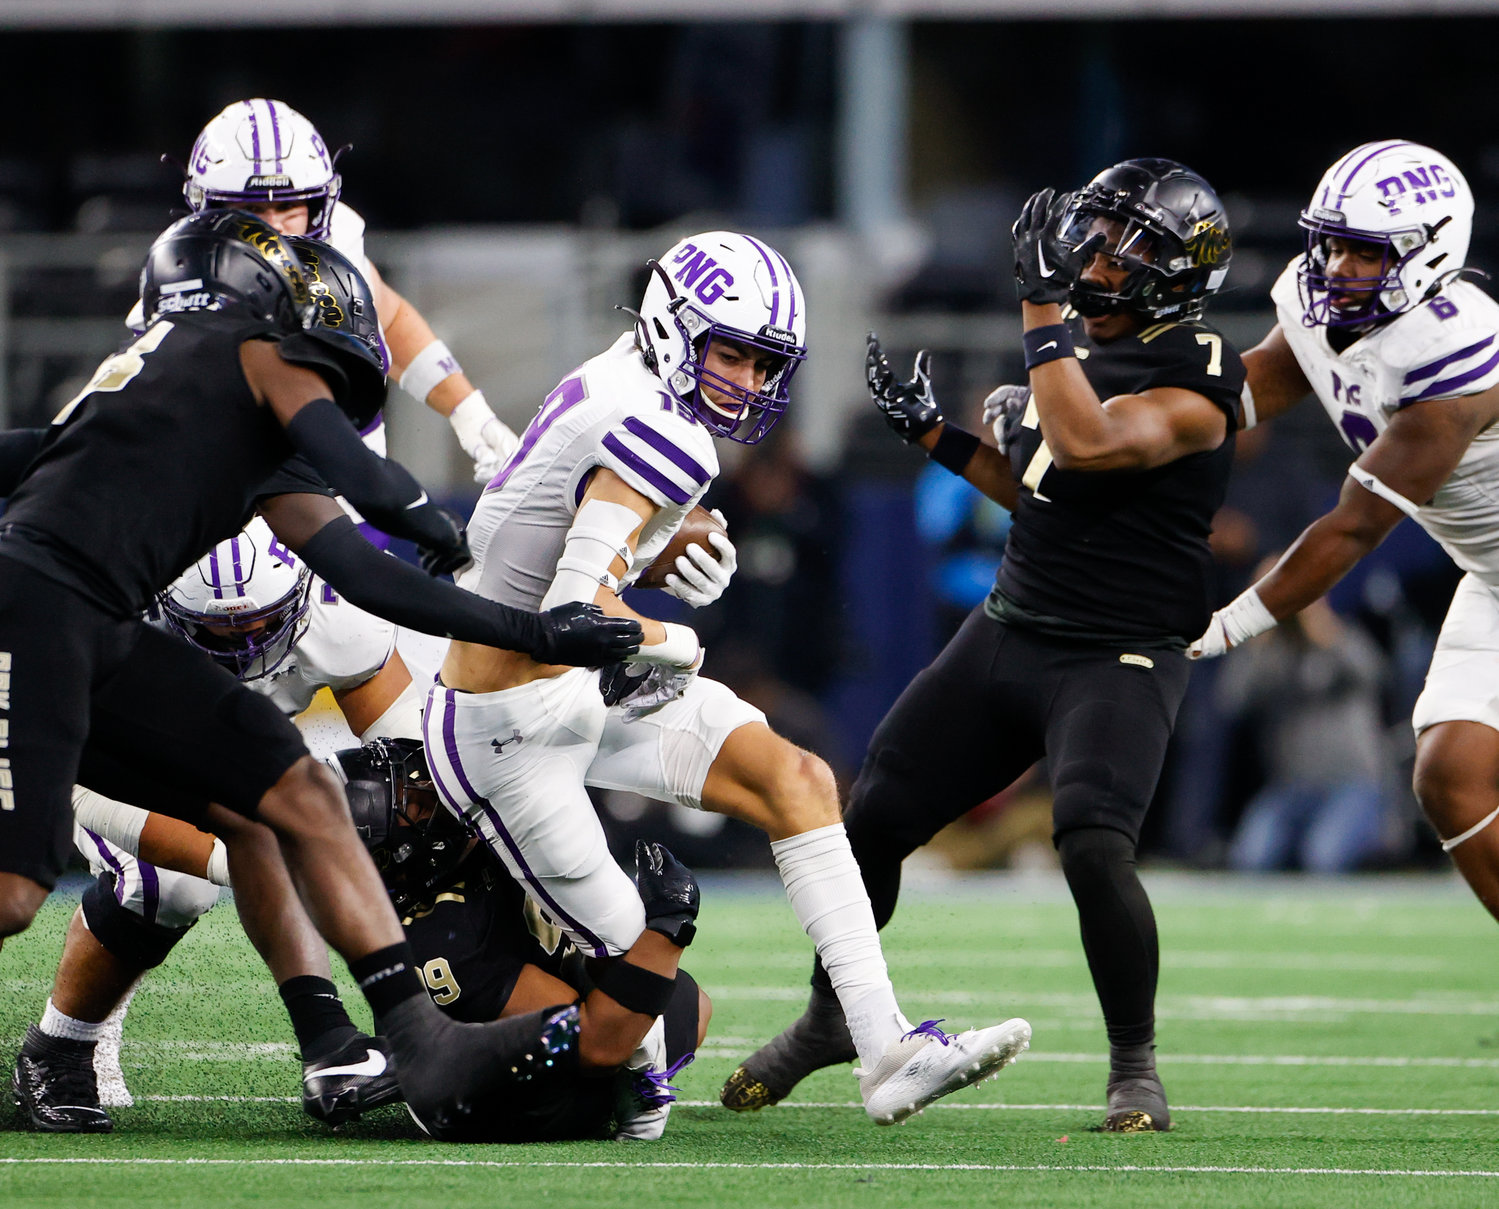 Port Neches-Groves wide receiver Shea Adams (19) carries the ball during the Class 5A Division II football state championship game between South Oak Cliff and Port Neches-Groves in Arlington, Texas, on Dec. 16, 2022.